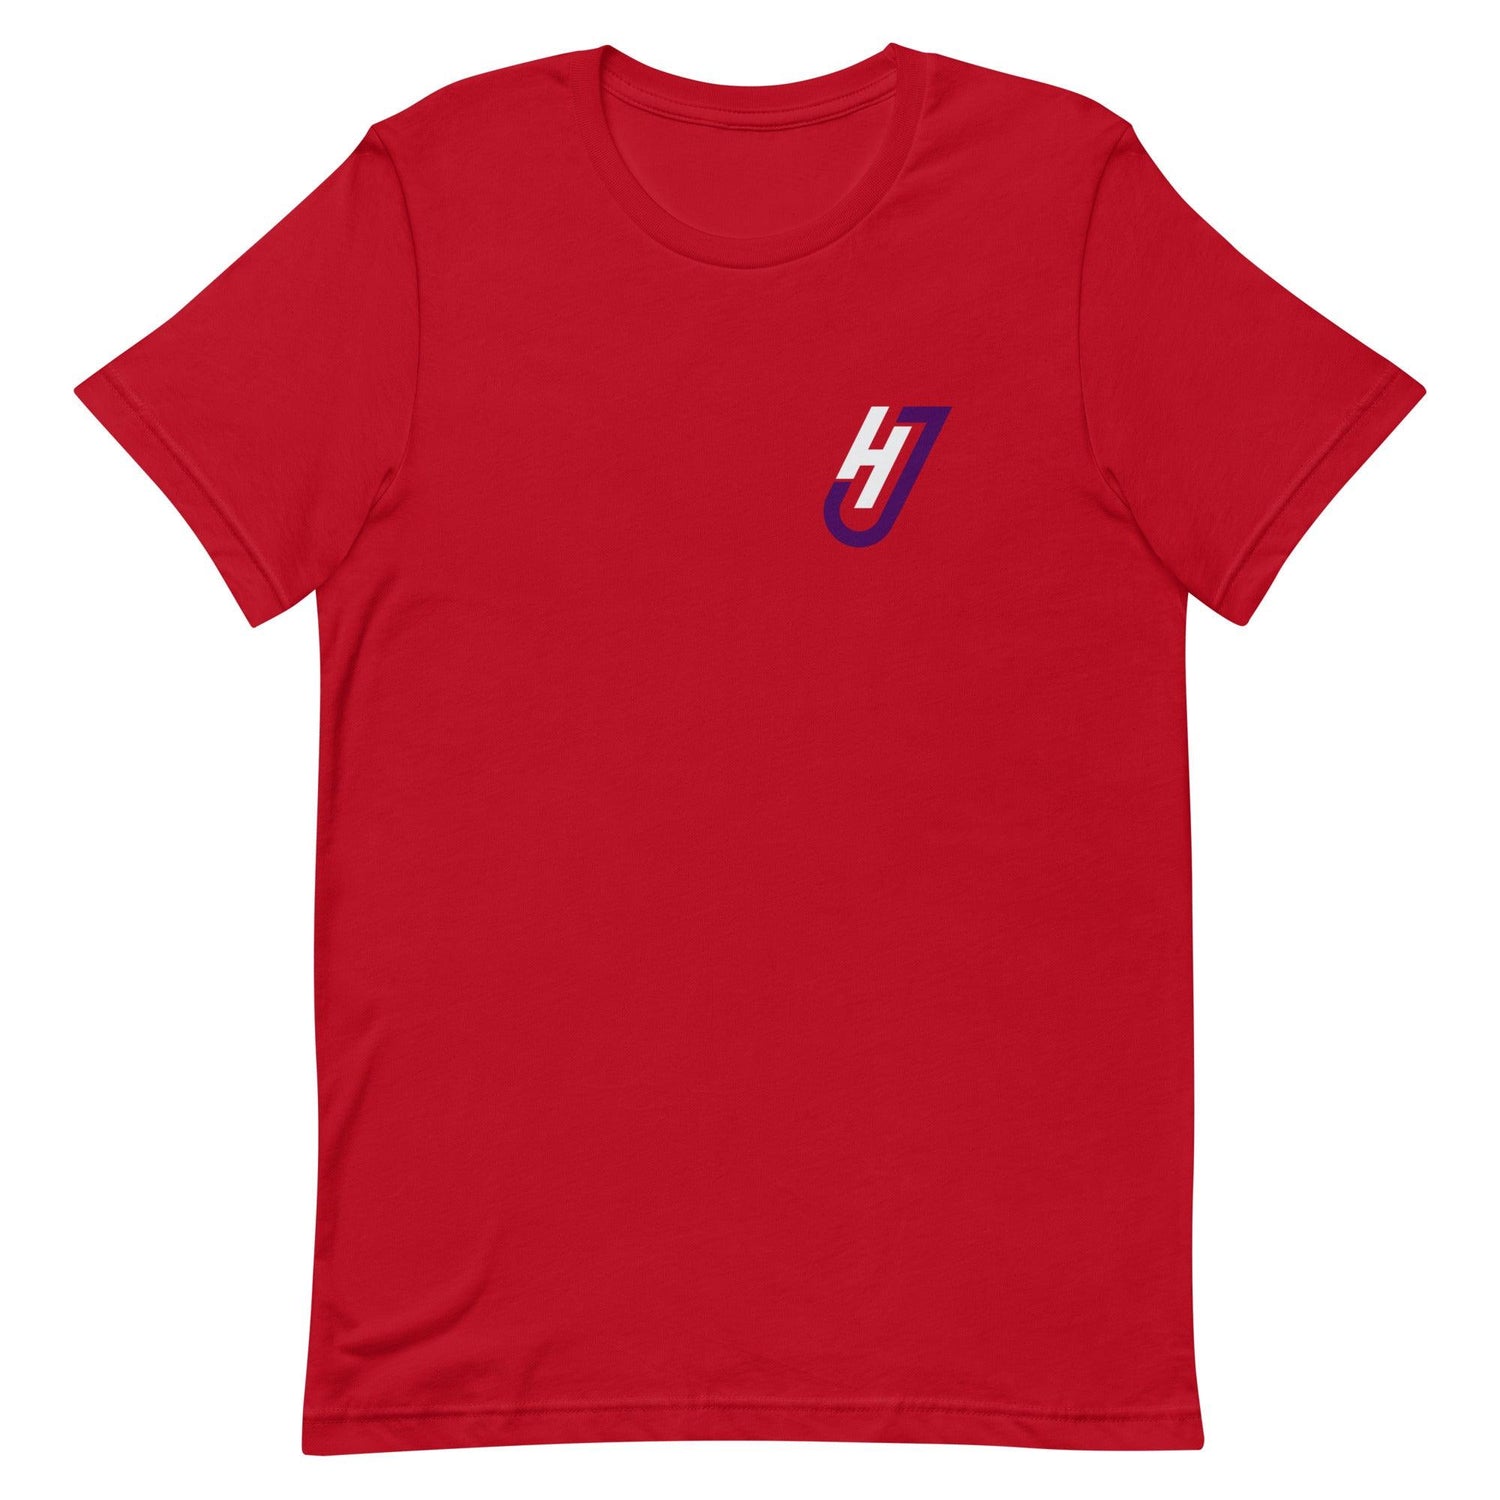 Justice Hill “JH” t-shirt - Fan Arch